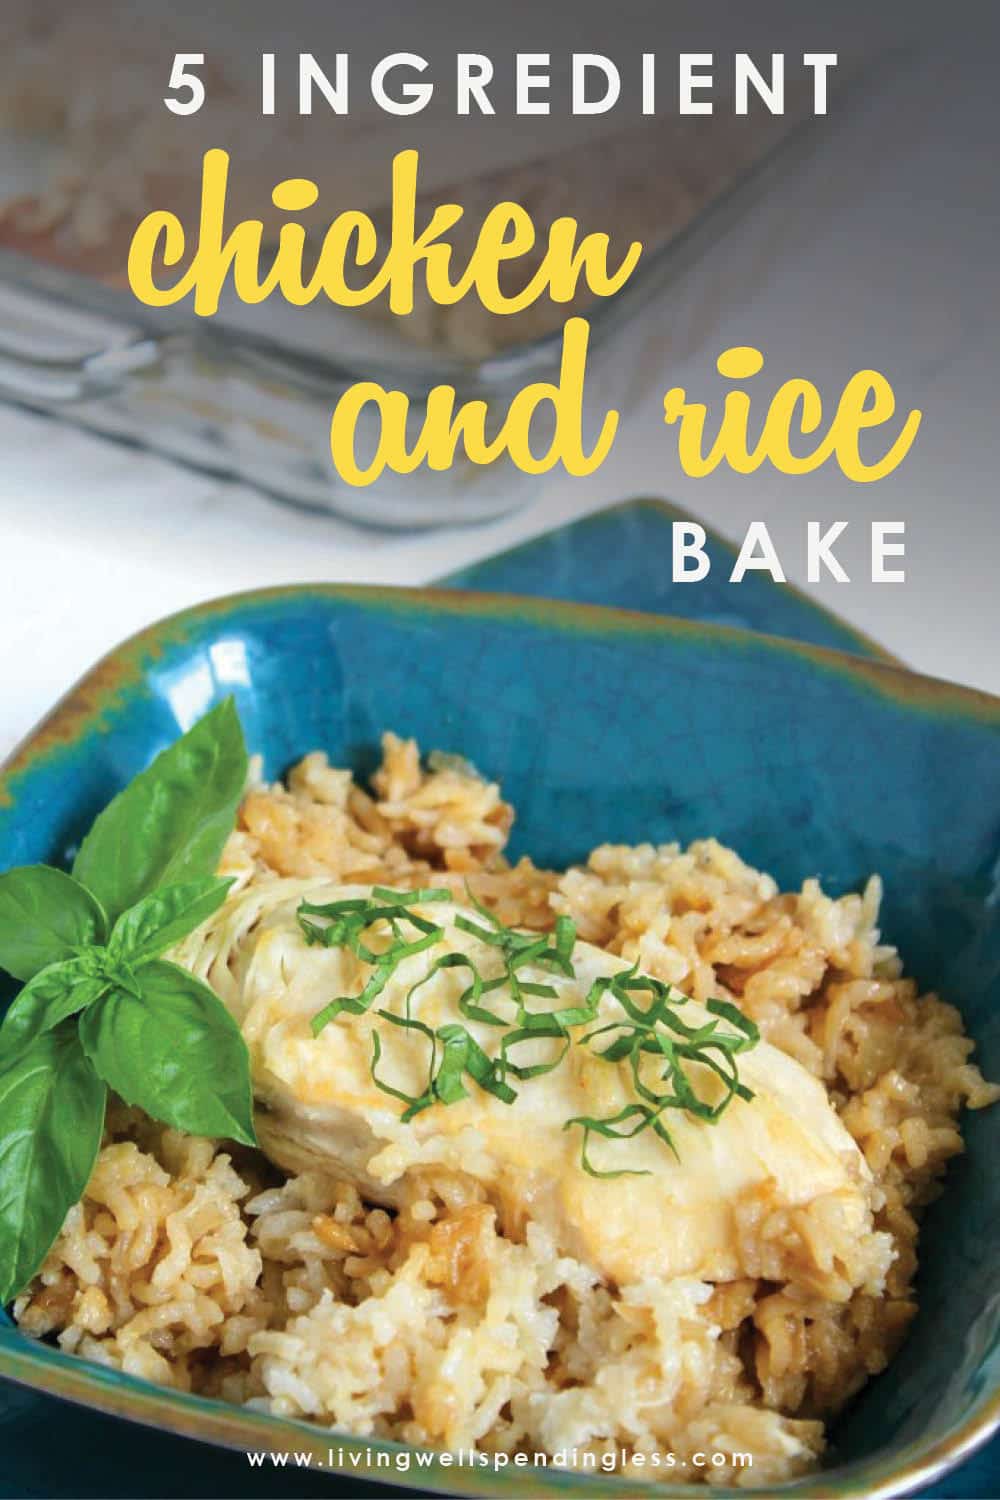 This delicious 5-Ingredient Chicken and Rice Bake whips up fast using a handful of pantry staples. Everyone will love this simple comfort meal!